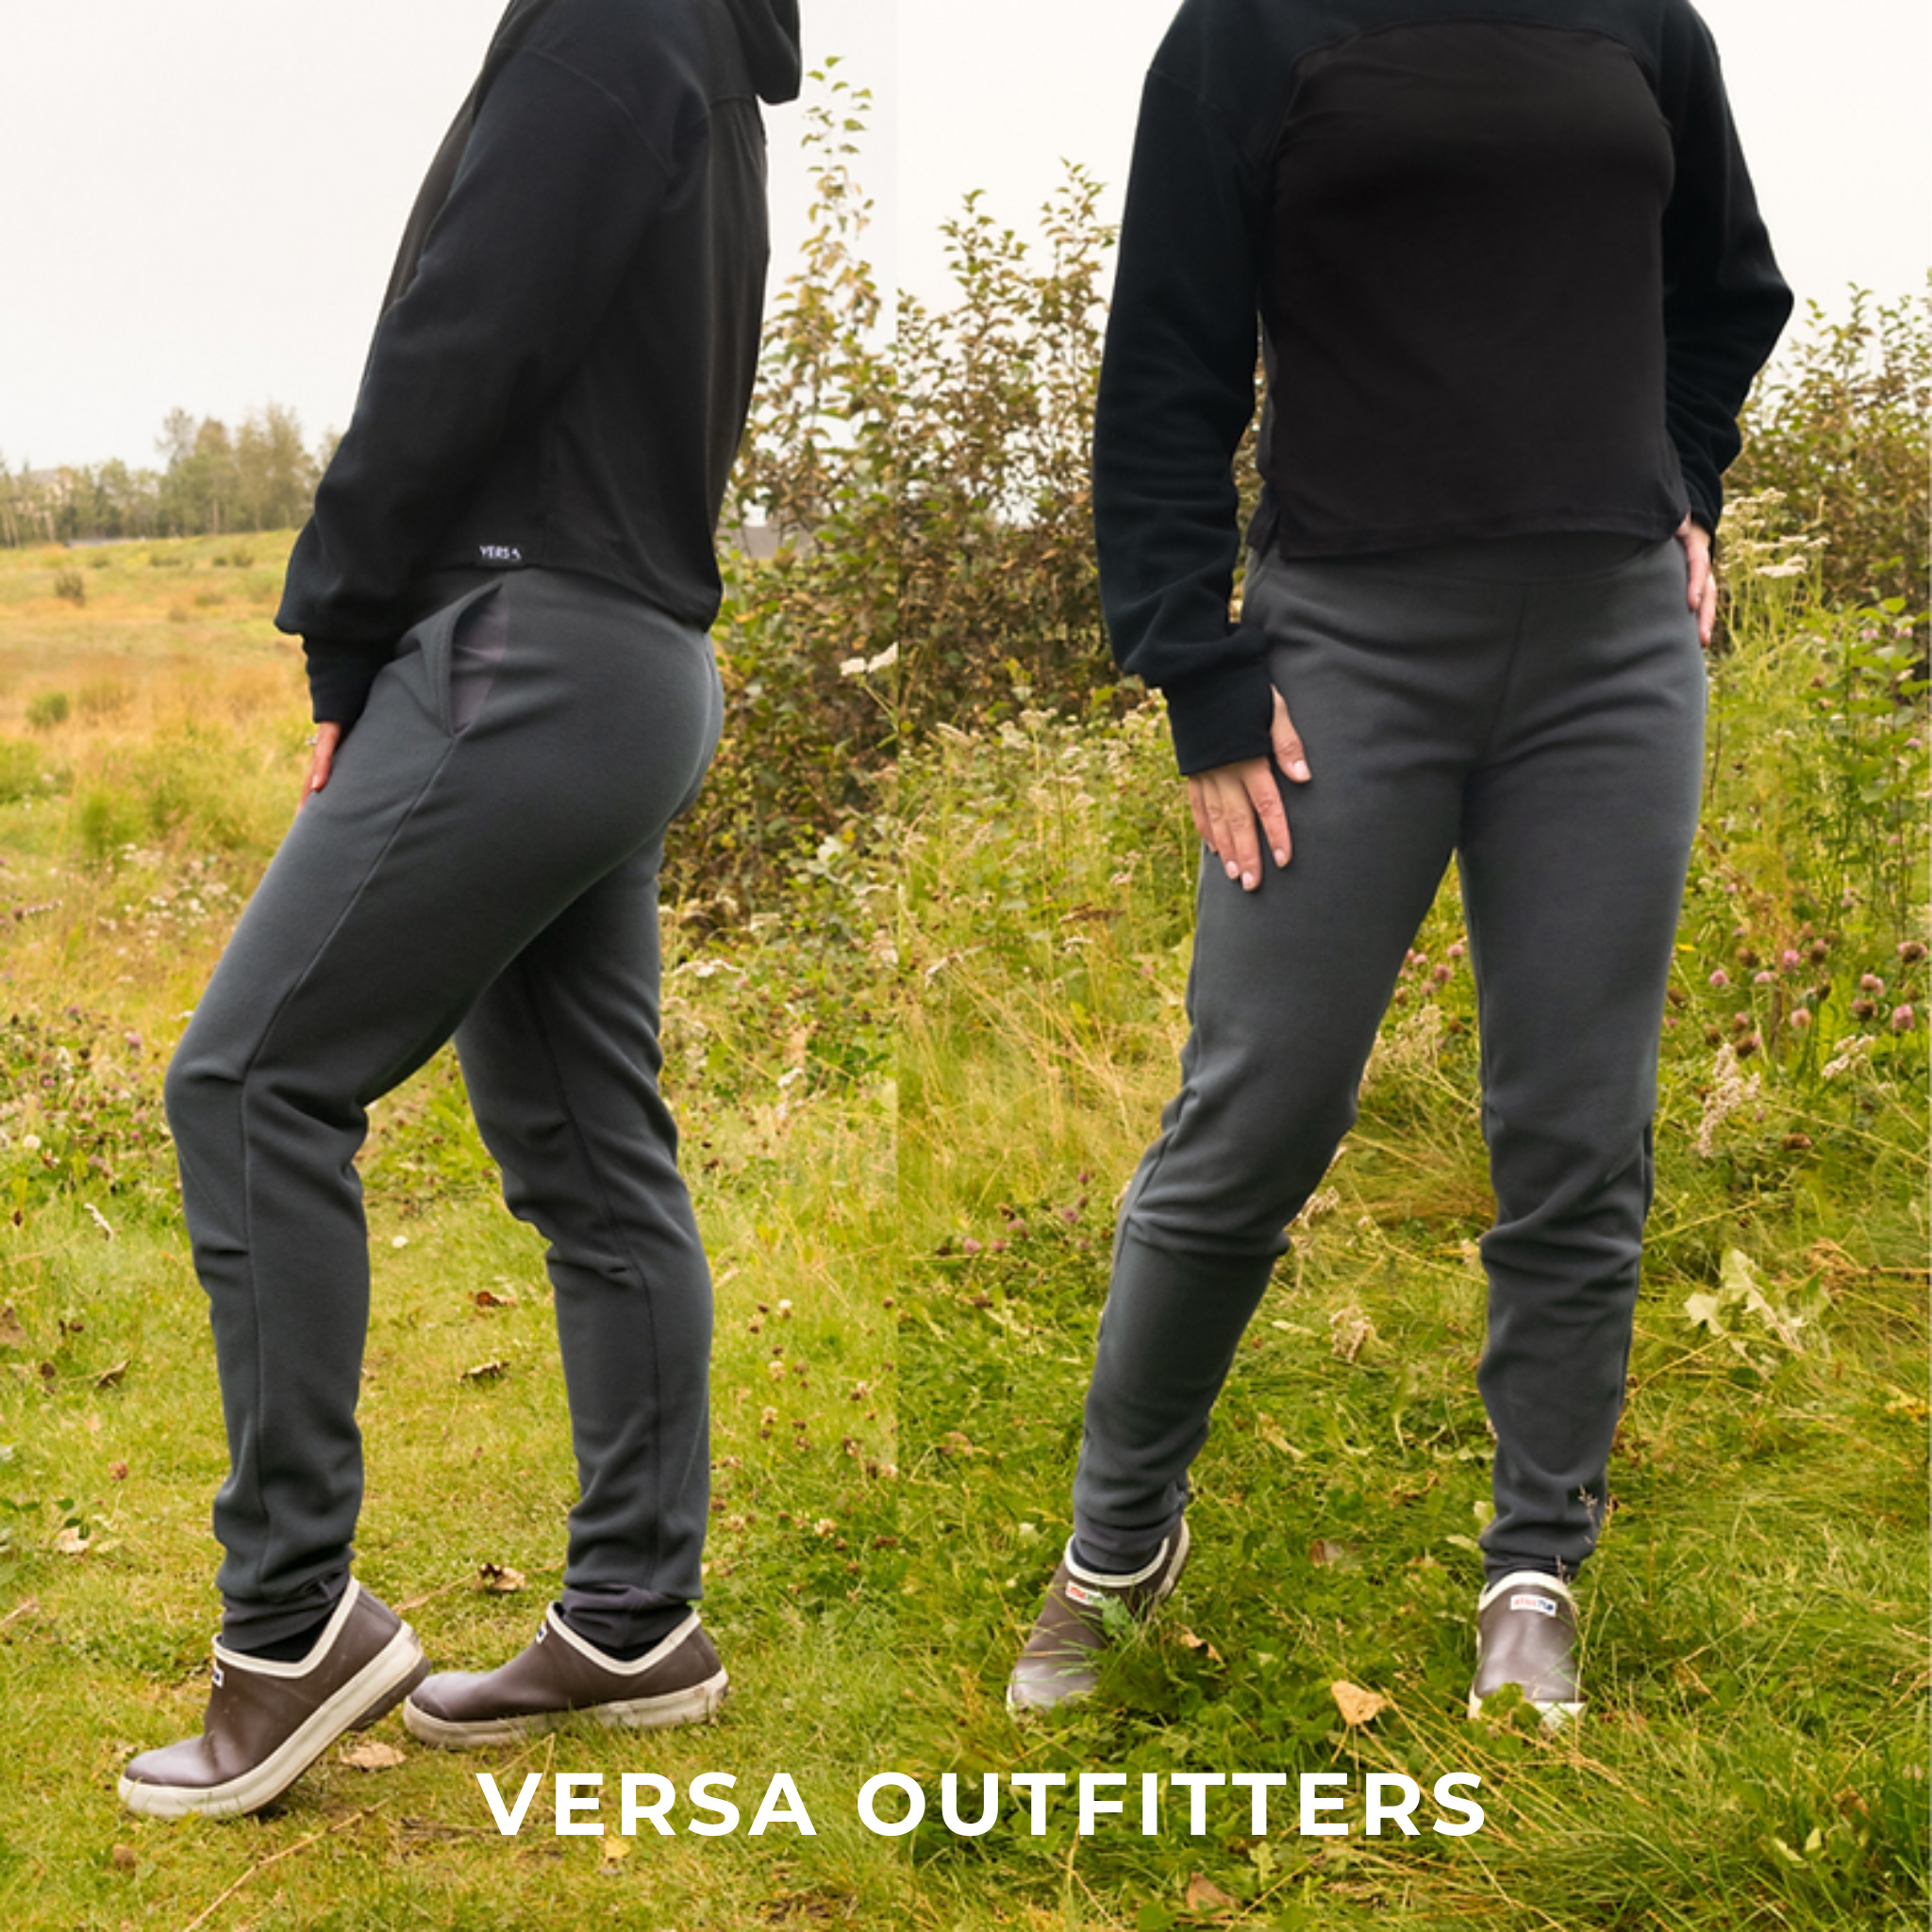 Versa Outfitters